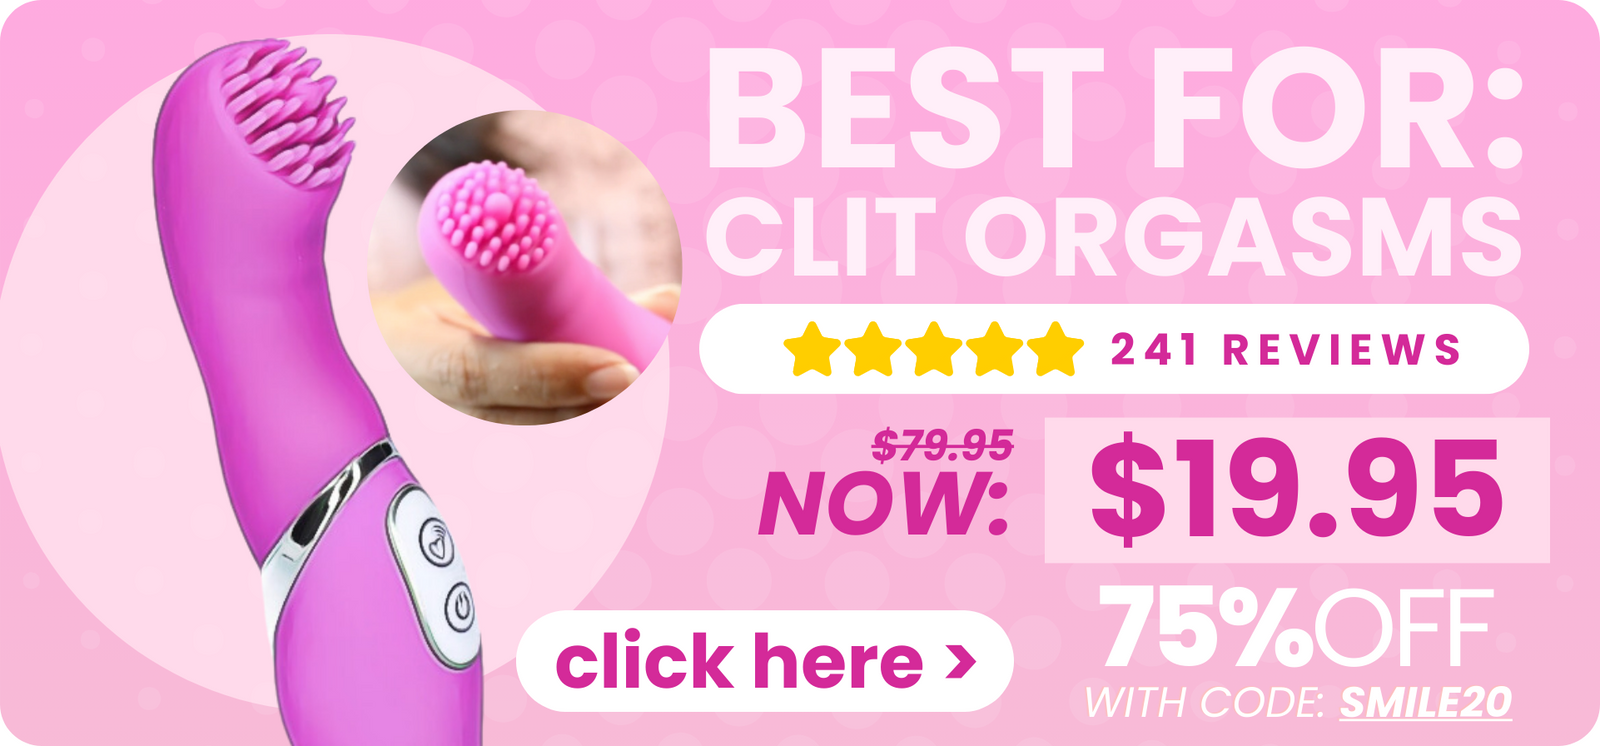 Best for: clit orgasms! Get it for $19.95 (originally $79.95) with code: SMILE20 at checkout.